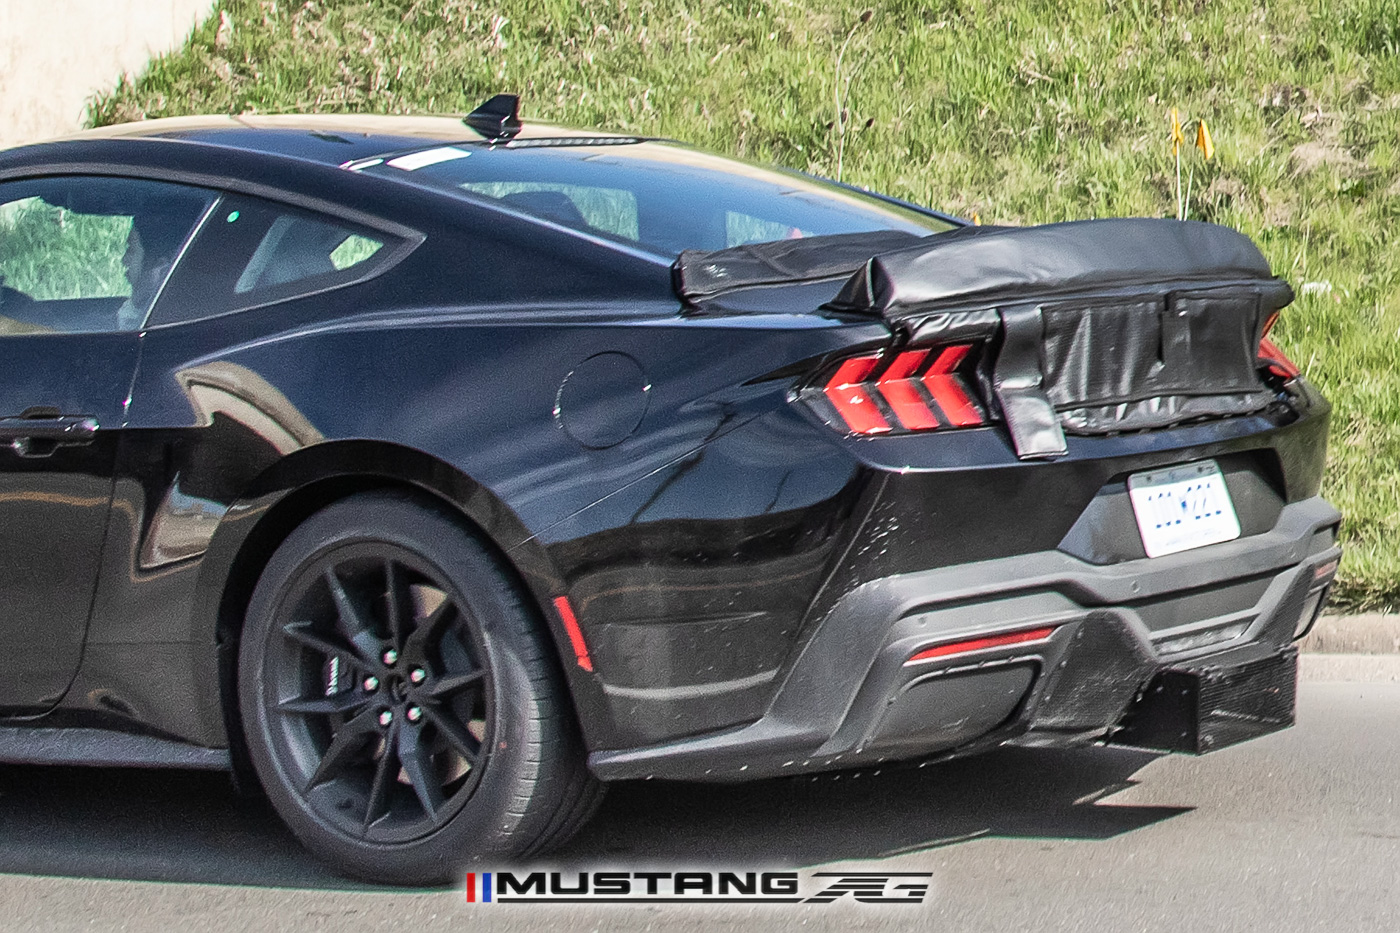 S650 Mustang 📸 Mustang GT3 Road-Version Prototype Spied Testing with Center-Exit Exhaust s650-mustang-variant-prototype-center-exit-exhaust-4